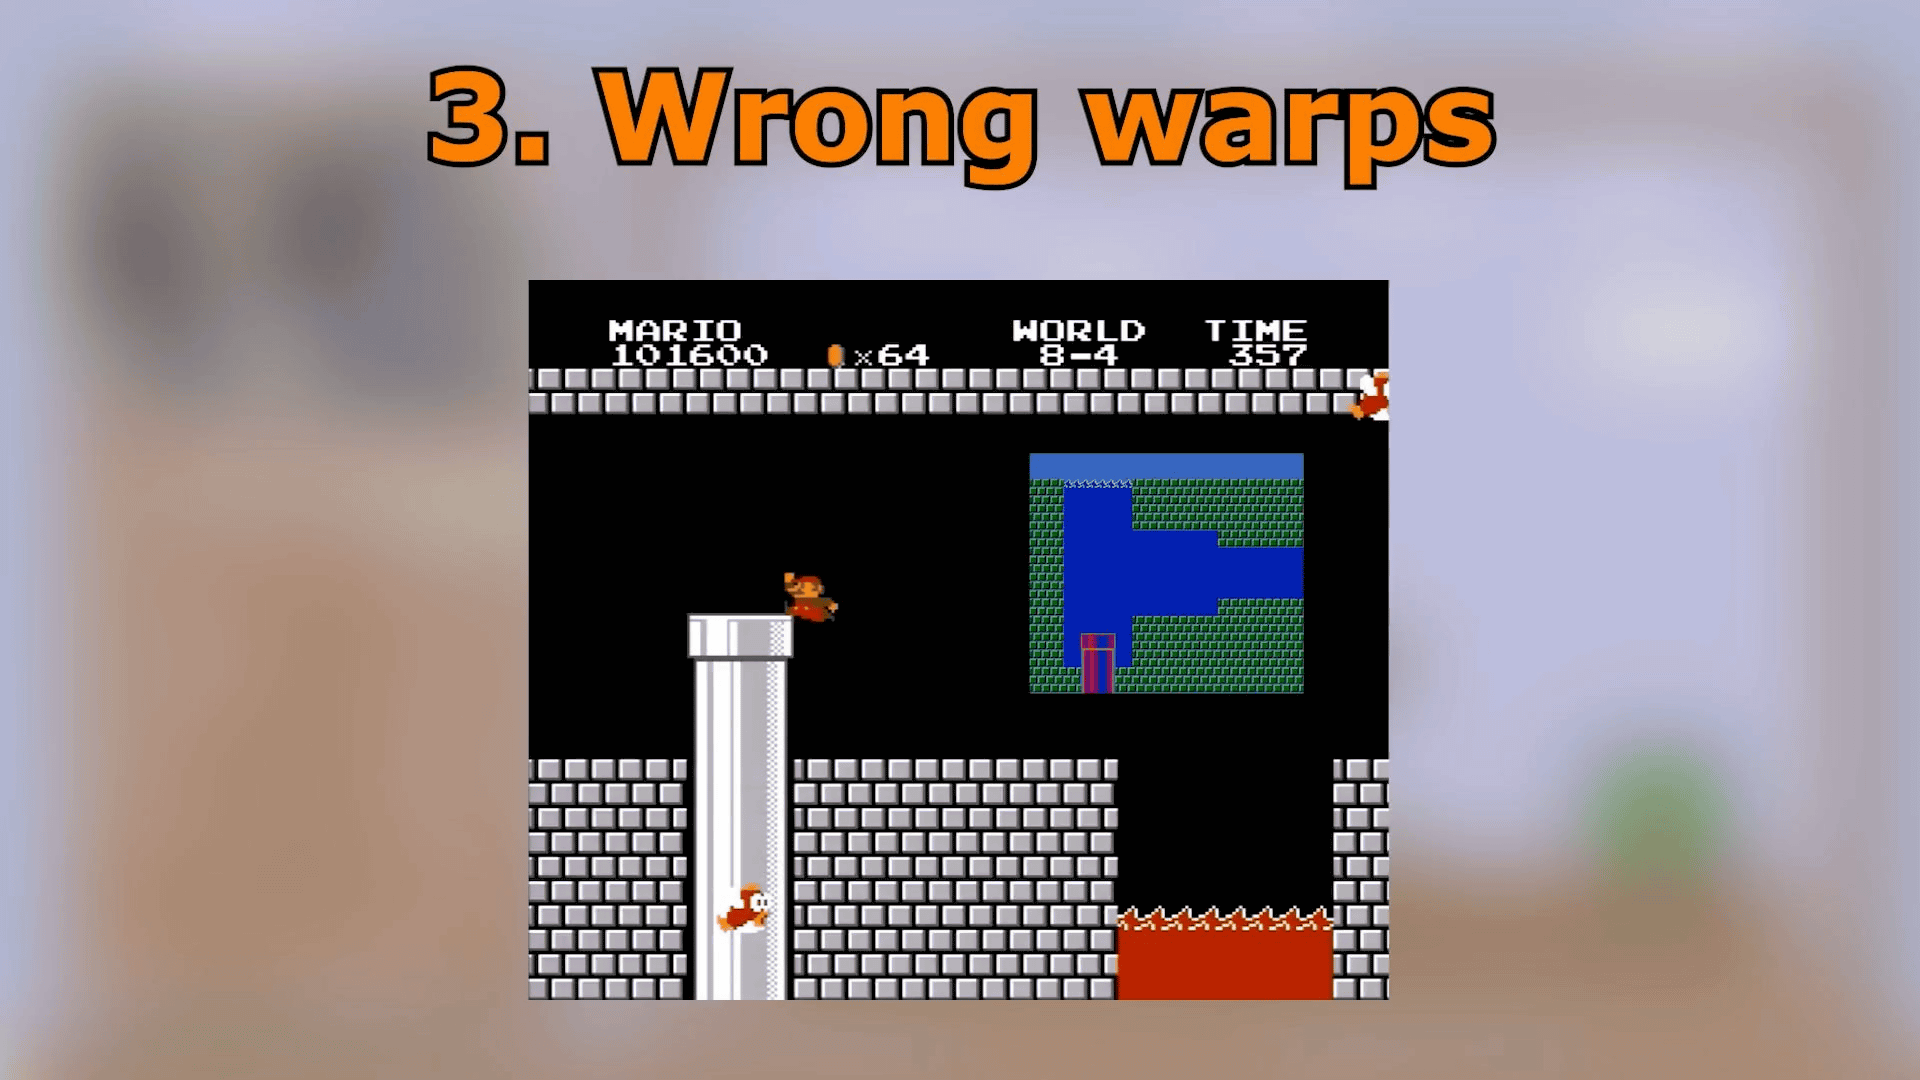 Super Mario Bros Rta World Record Set What Is The Wall Of 4 Minutes 55 Seconds Made Impossible For Humankind Gigazine